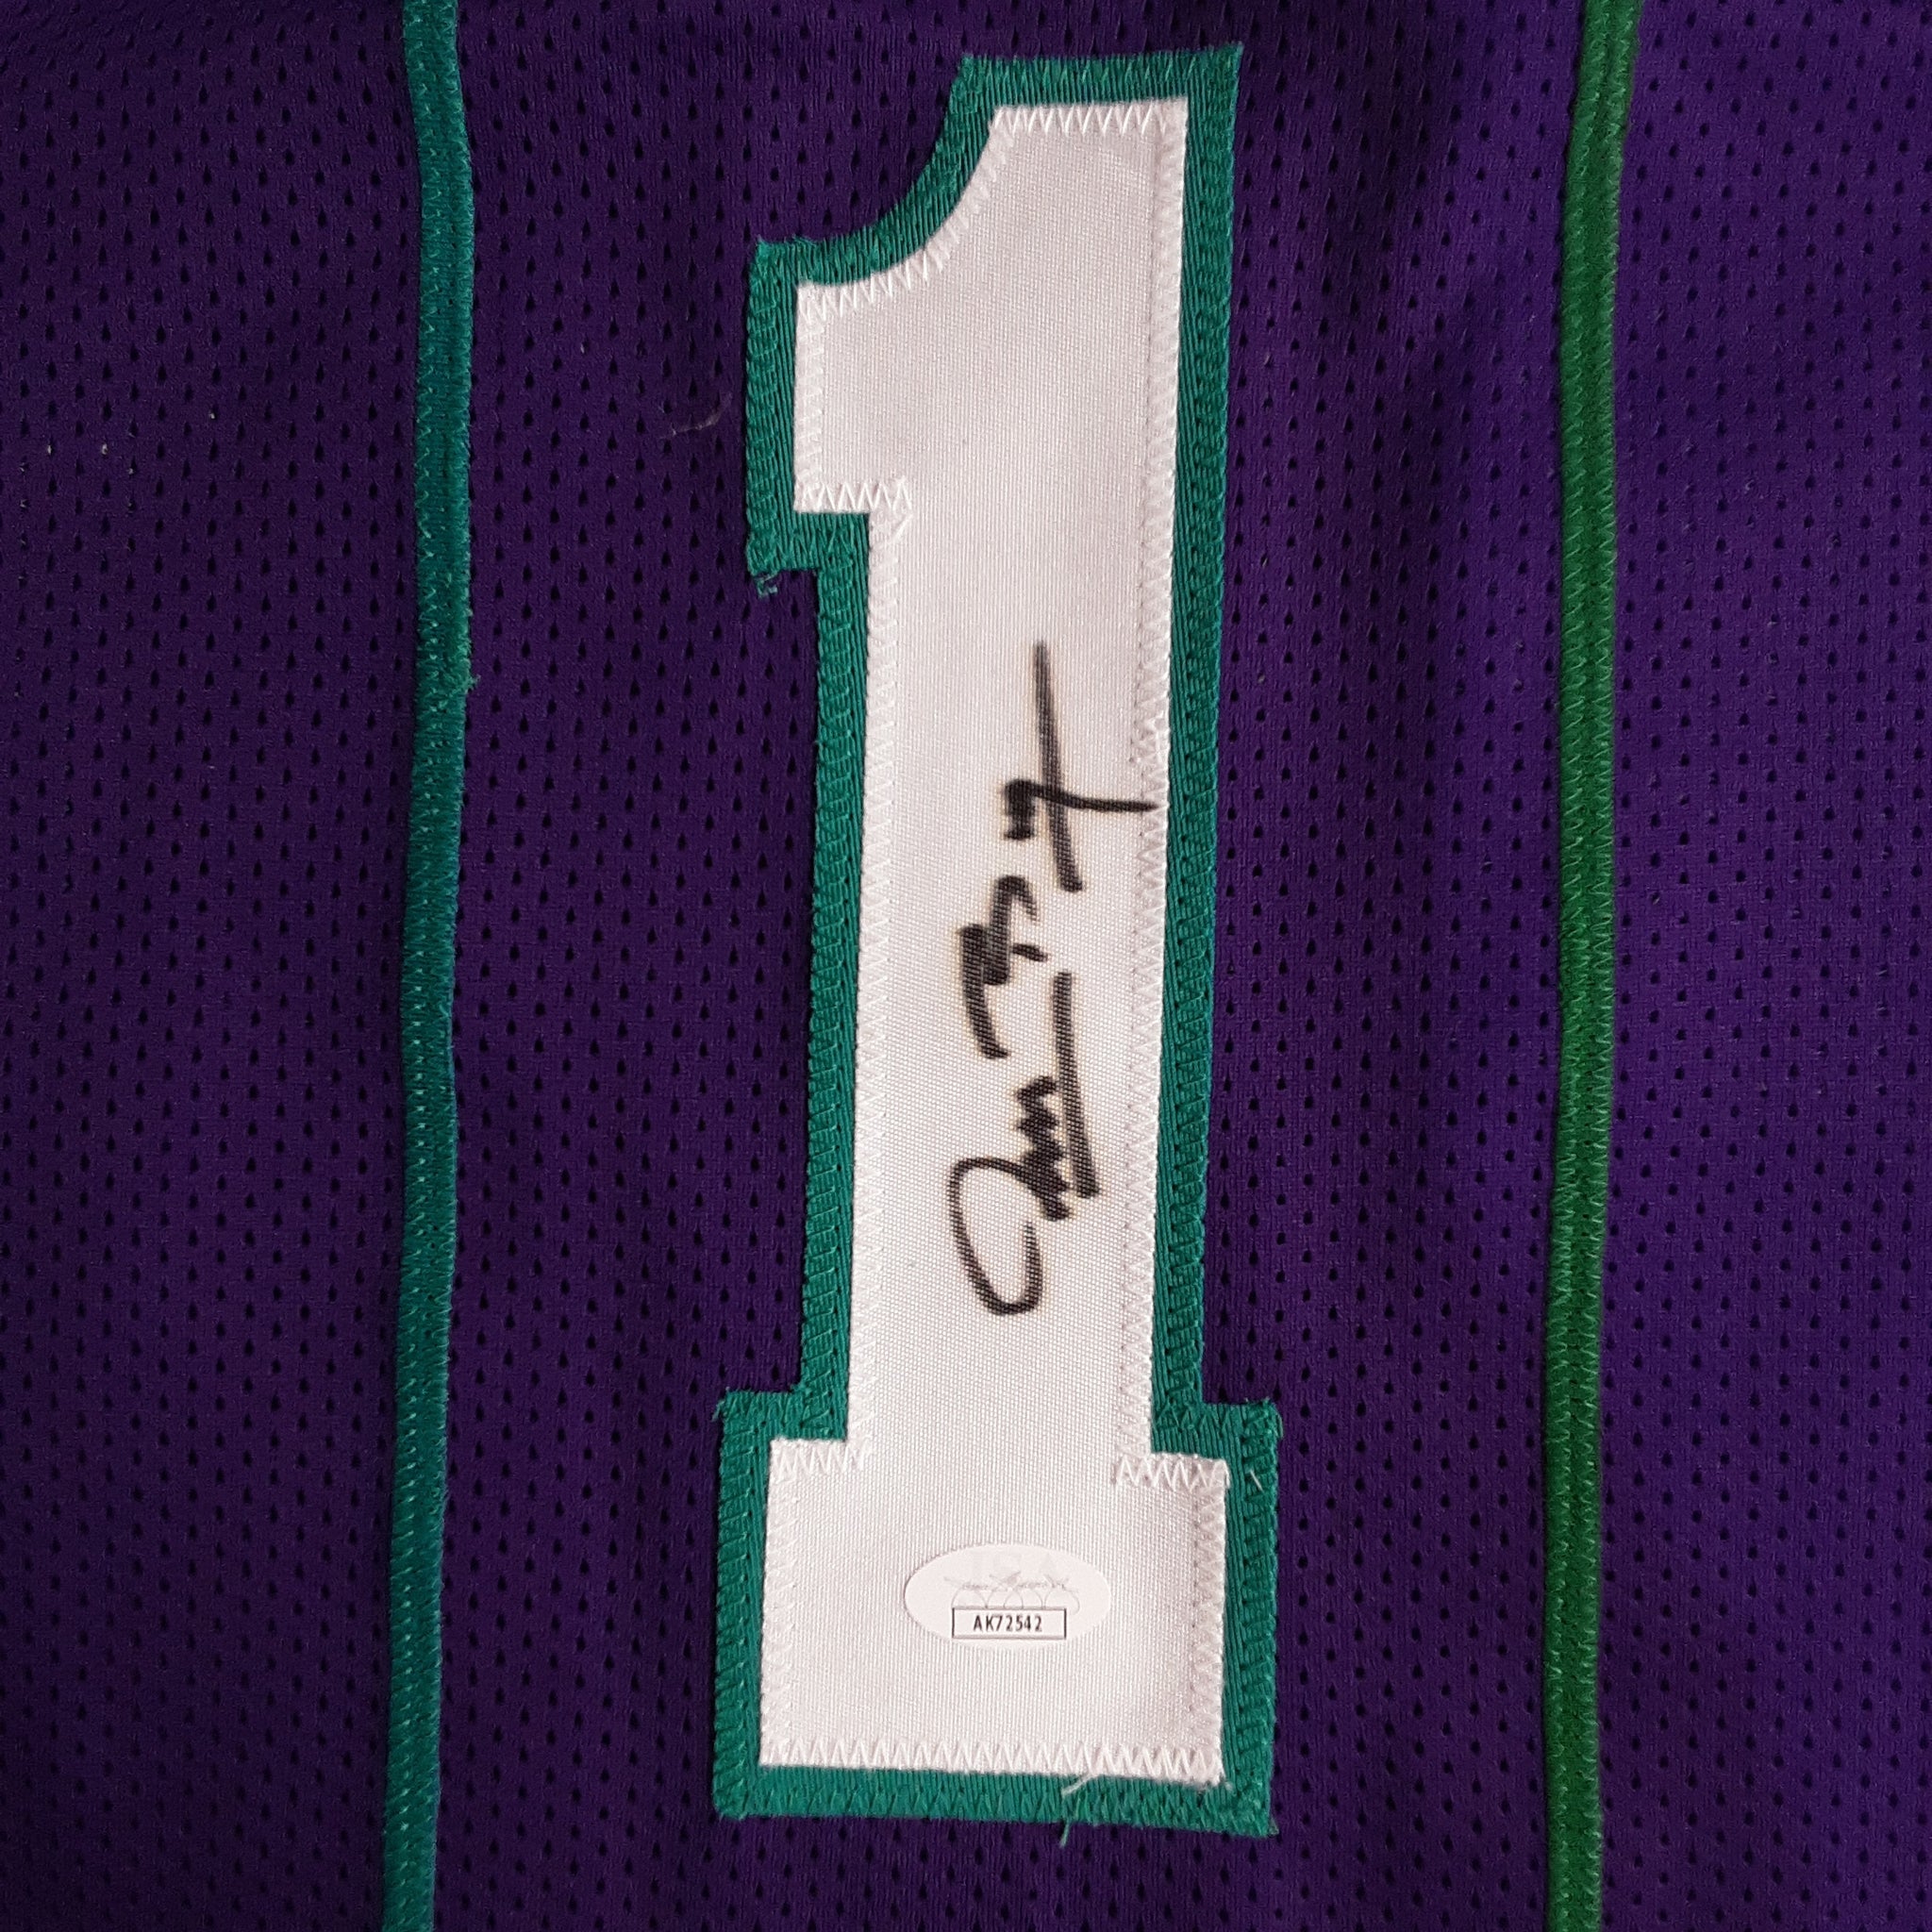 Tyrone Muggsy Bogues Authentic Signed Pro Style Jersey Autographed JSA